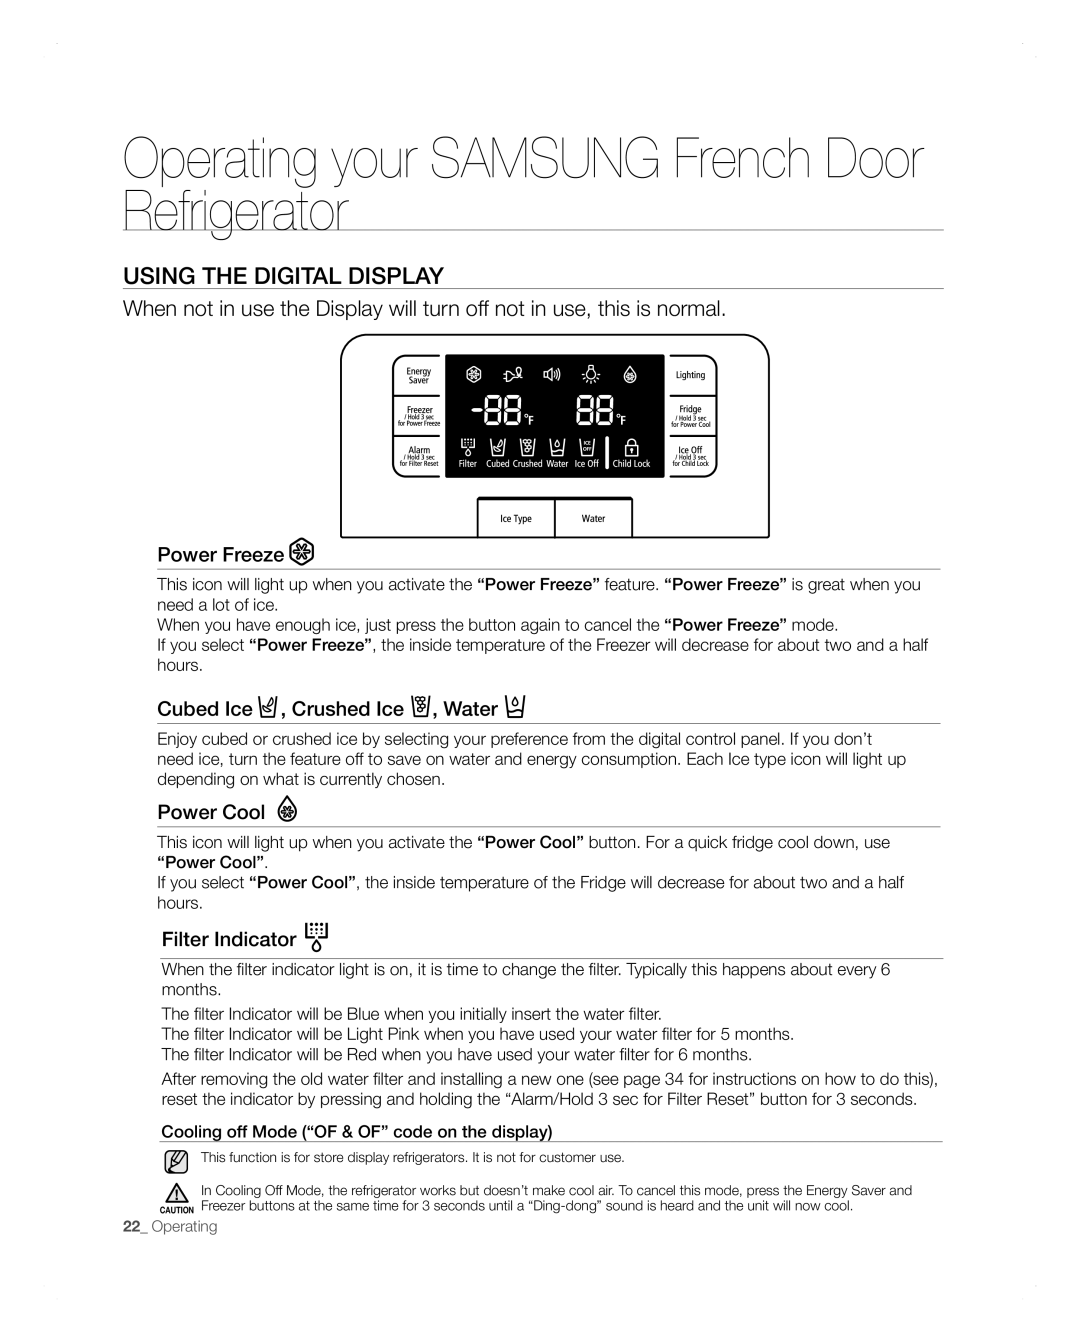 Samsung RFG297AARS Using The Digital Display, Operating your SAMSUNG French Door Refrigerator, Power Freeze, Power Cool 